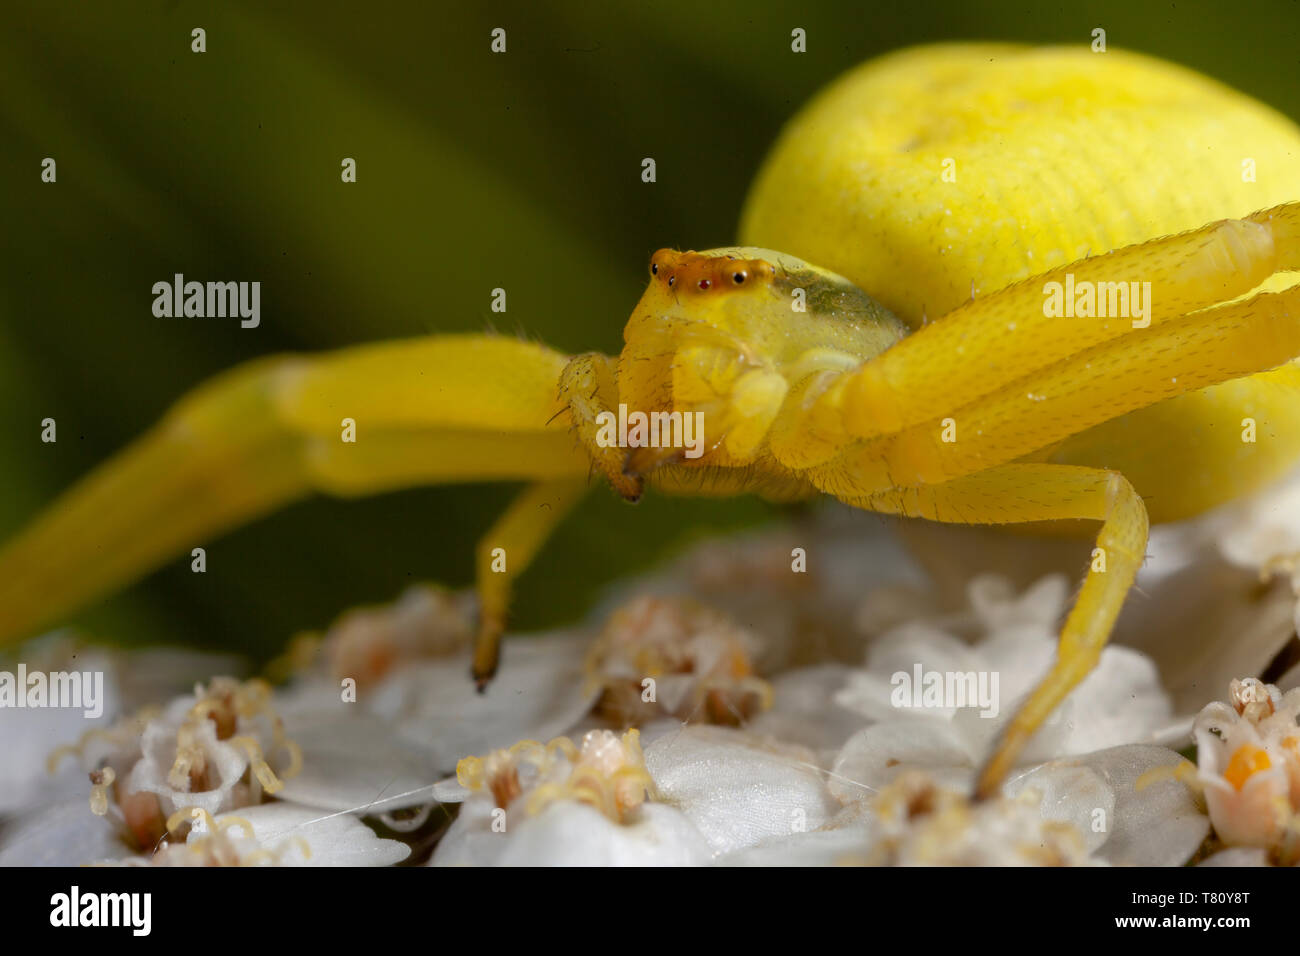 Close up of a yellow crab spider Stock Photo